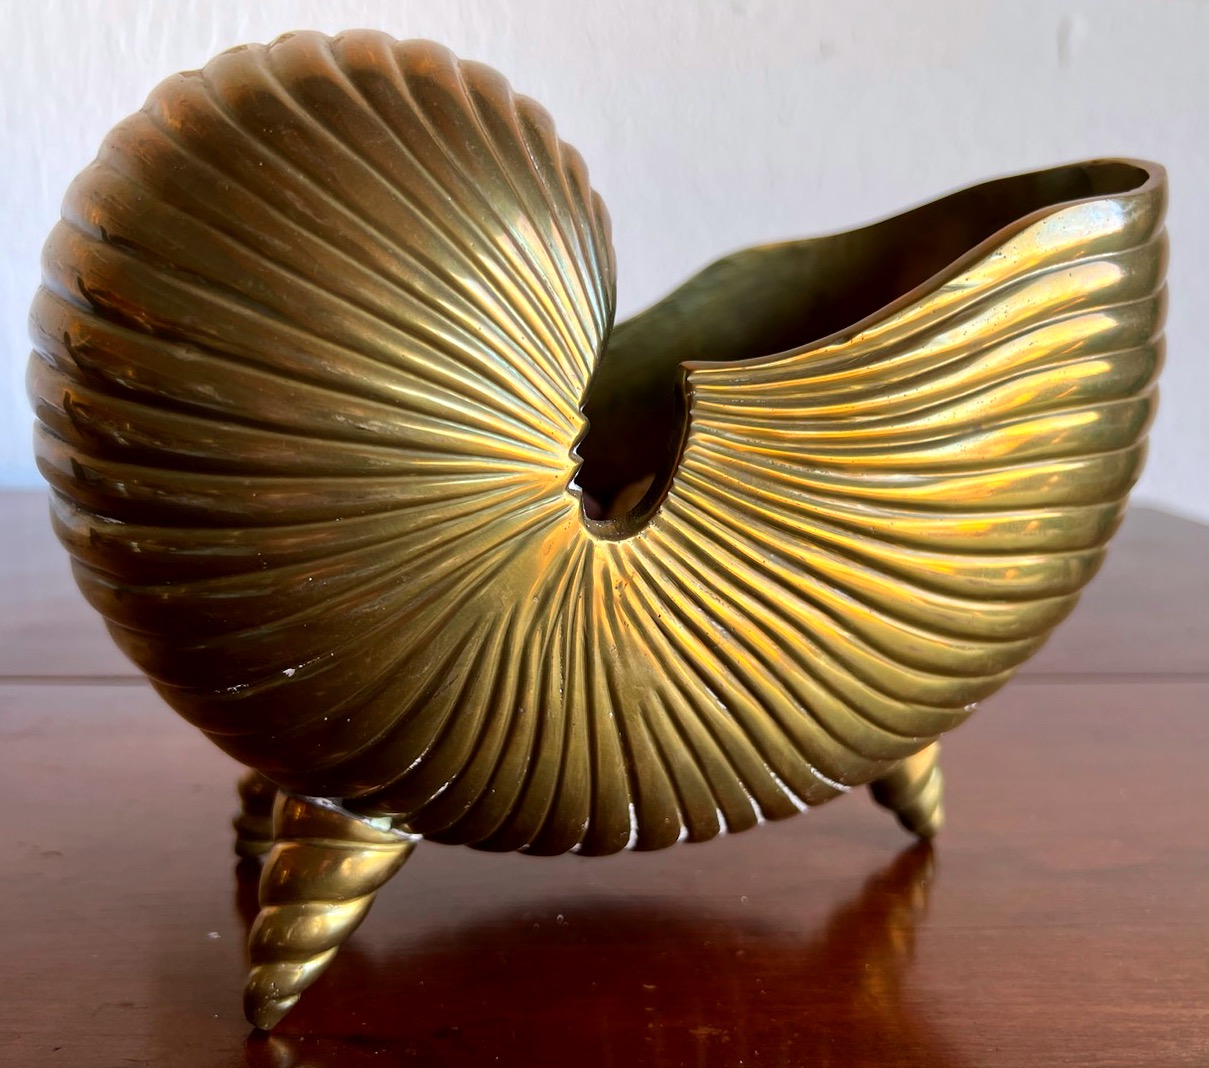 RARE Large Vintage Brass Seashell Planter - Great Quality and Details